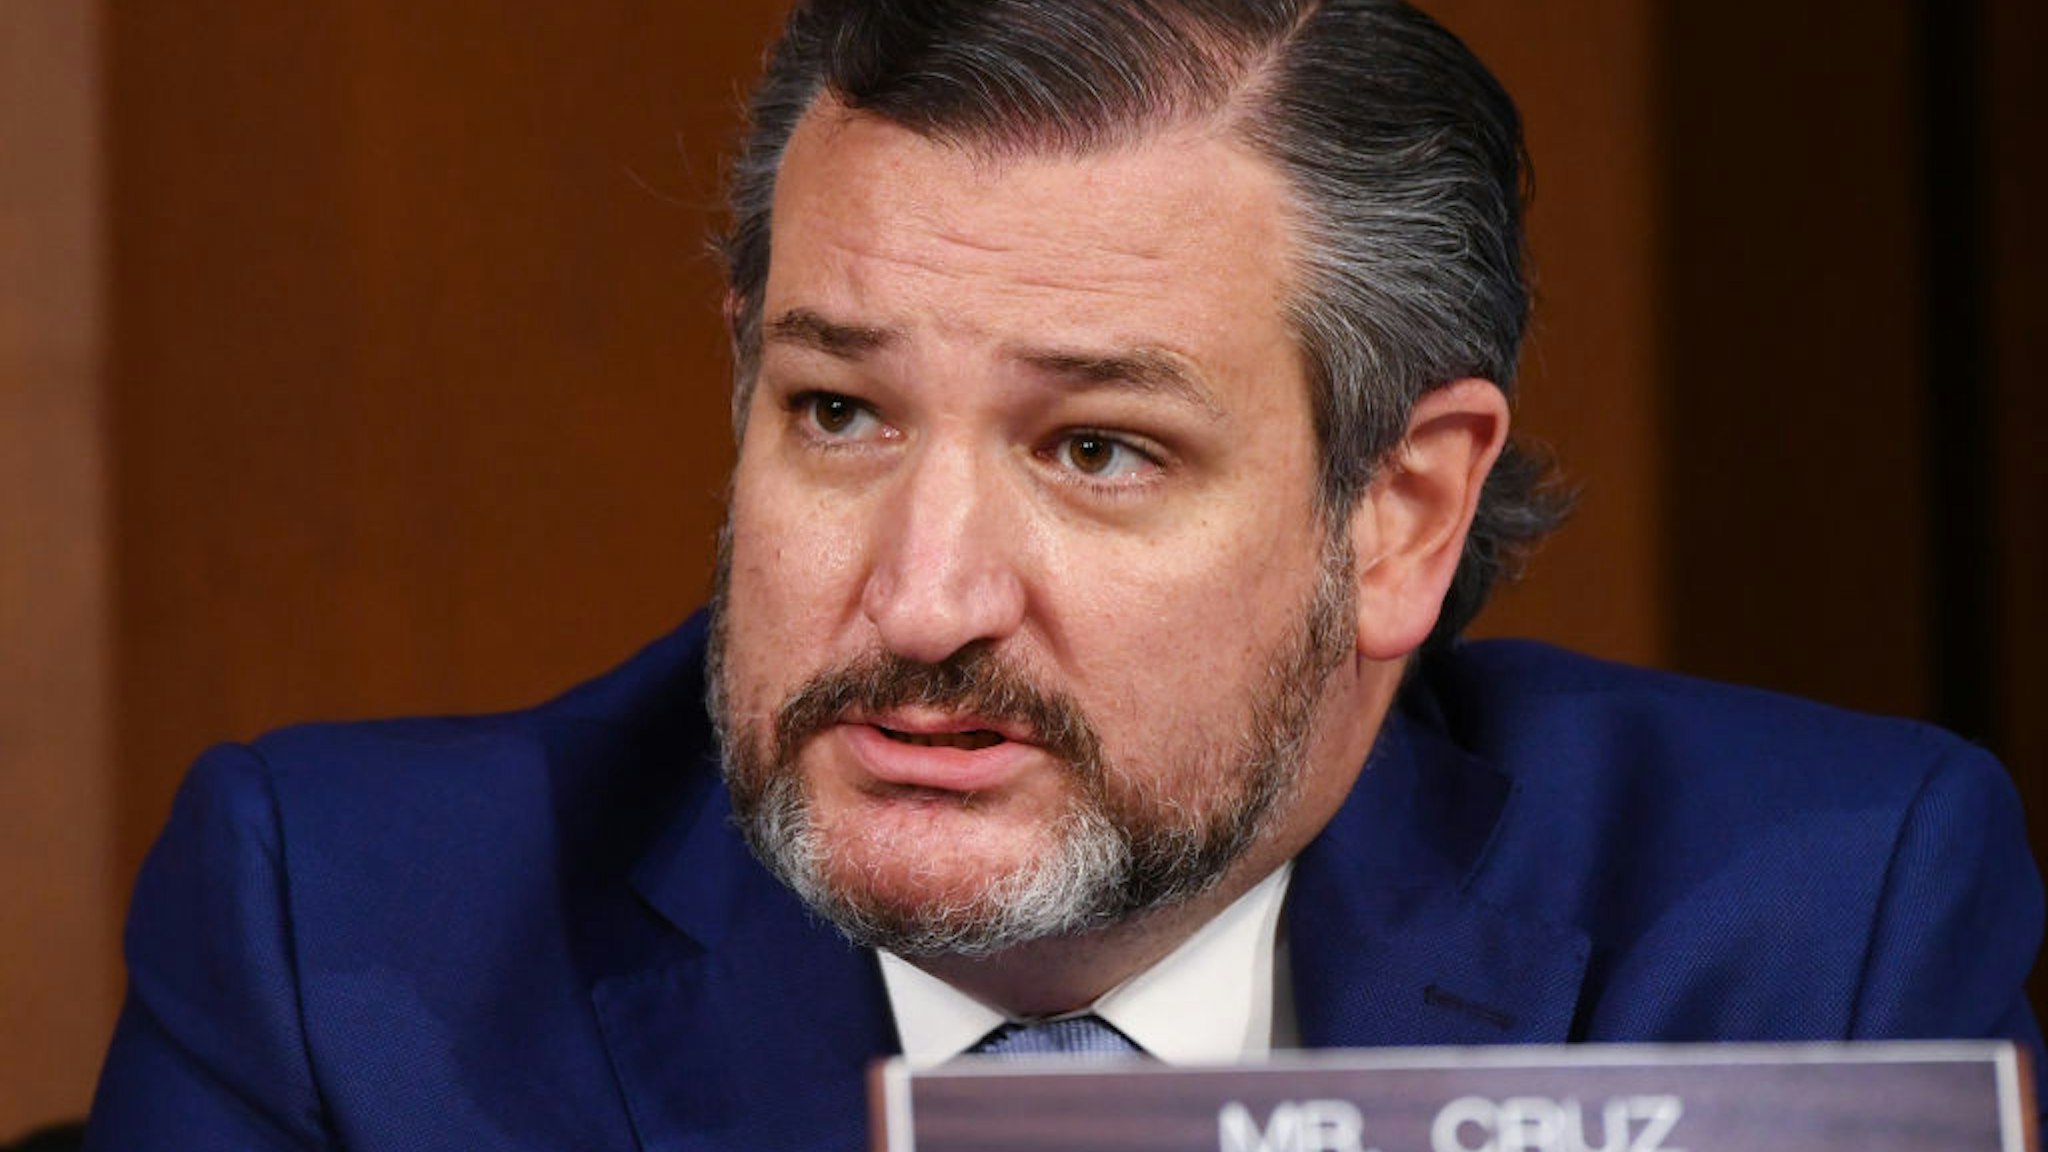 U.S. Sen. Ted Cruz (R-TX) speaks while Supreme Court nominee Judge Amy Coney Barrett testifies before the Senate Judiciary Committee on the second day of her Supreme Court confirmation hearing on Capitol Hill on October 13, 2020 in Washington, DC.